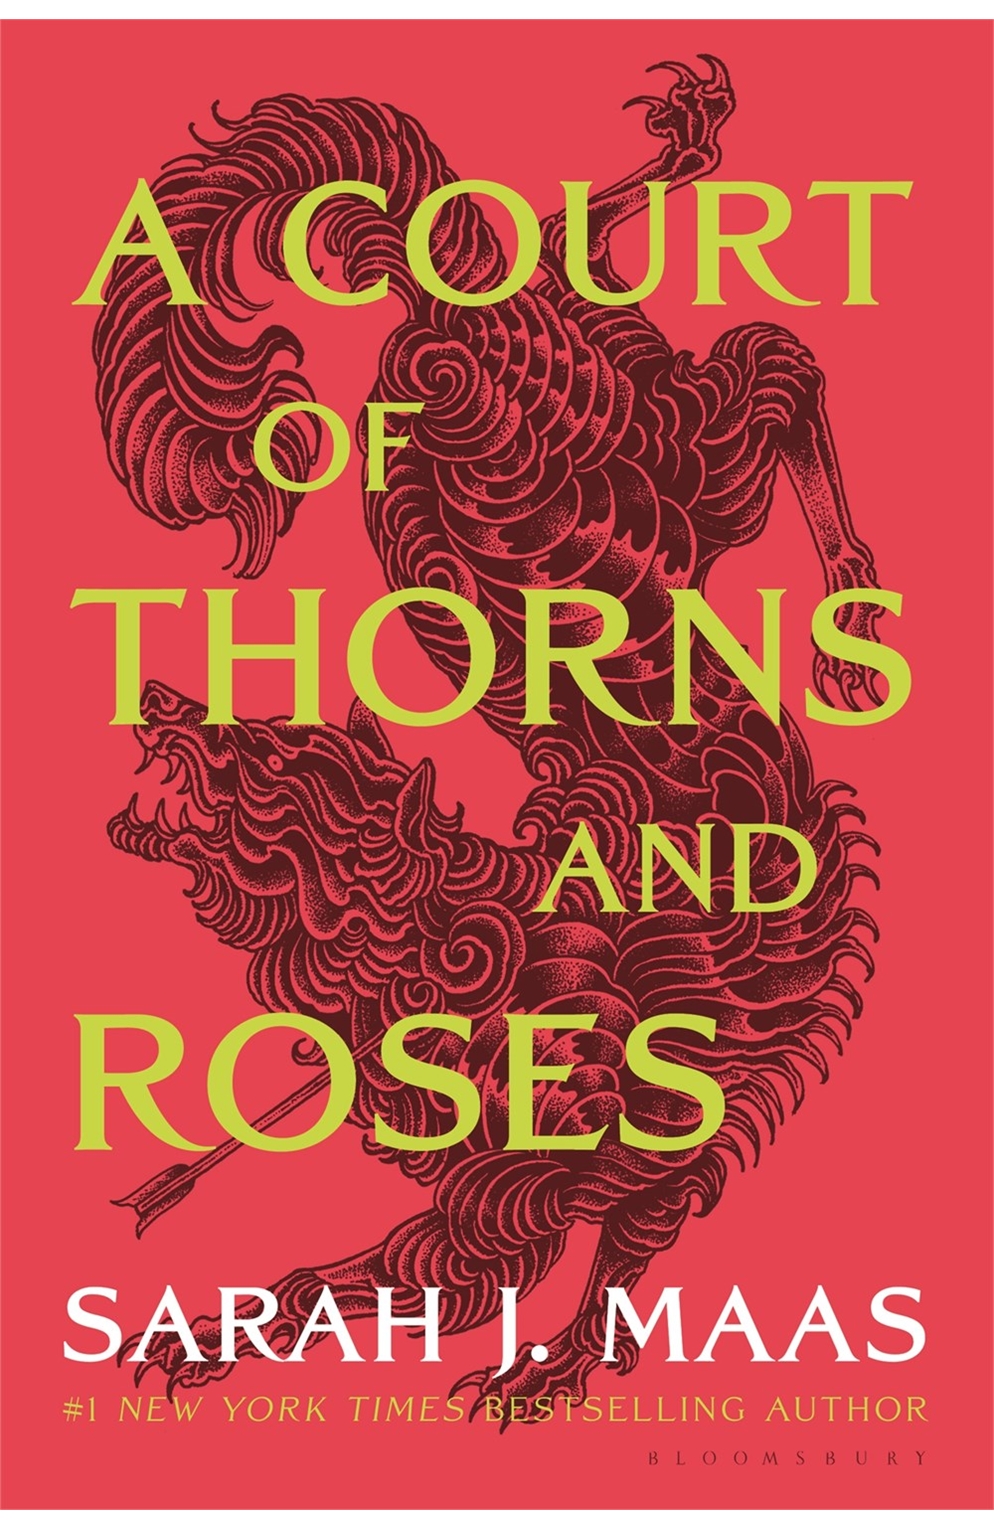 A Court of Thorns And Roses